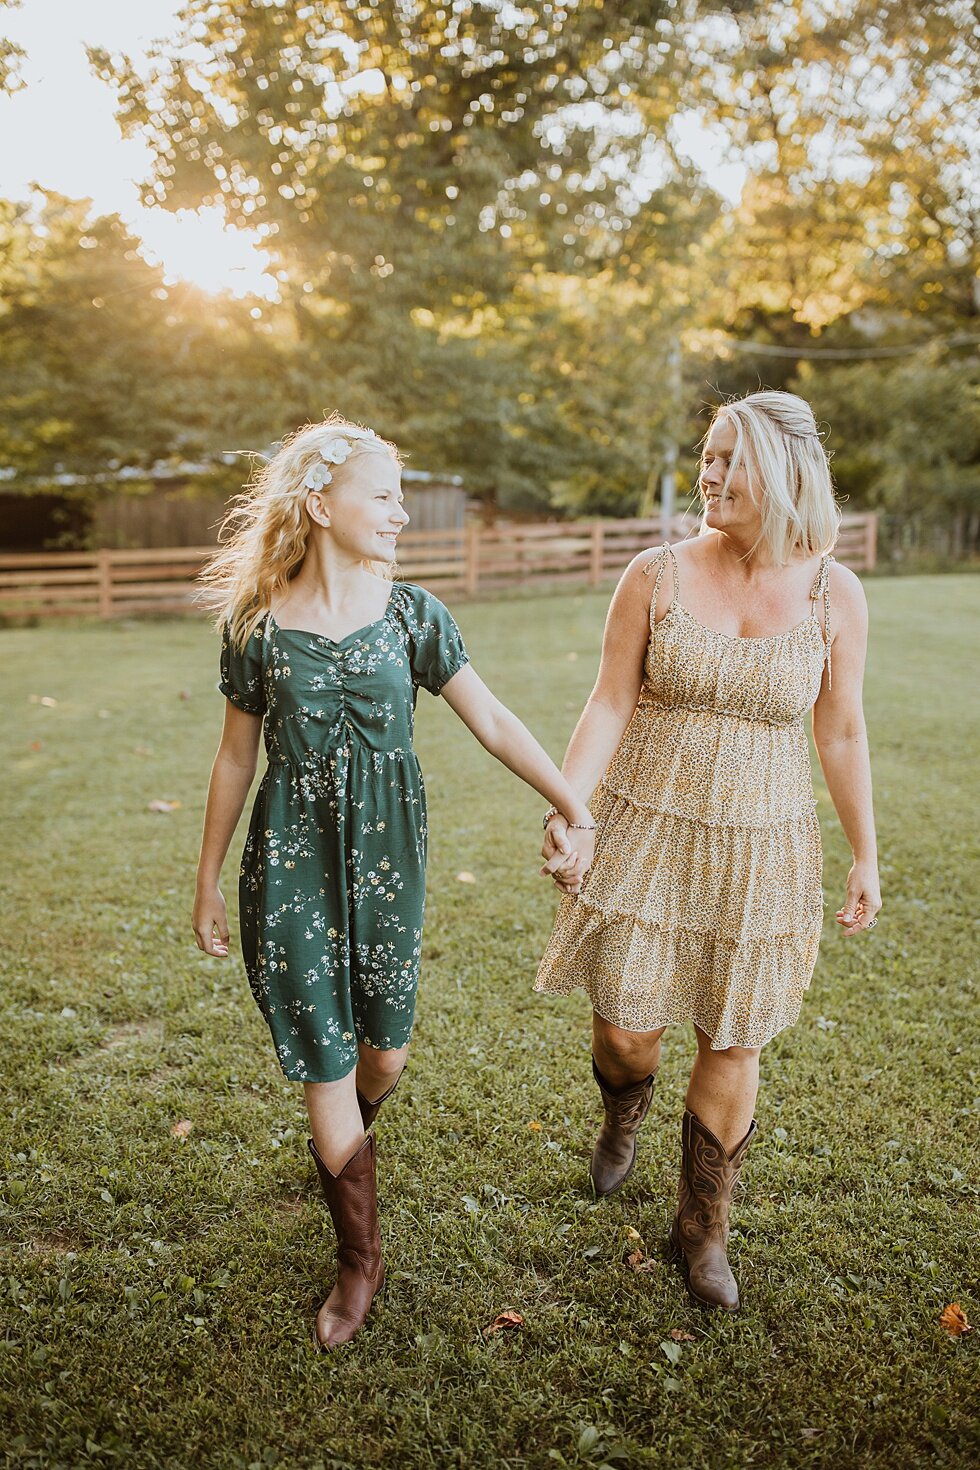  This beautiful mother and daughter walking hand in hand through their Midwest ranch. Fall Louisville Kentucky photographer mother daughter photography session portraits loving relationship western girls country roots #motherdaughter #bondingphotogra